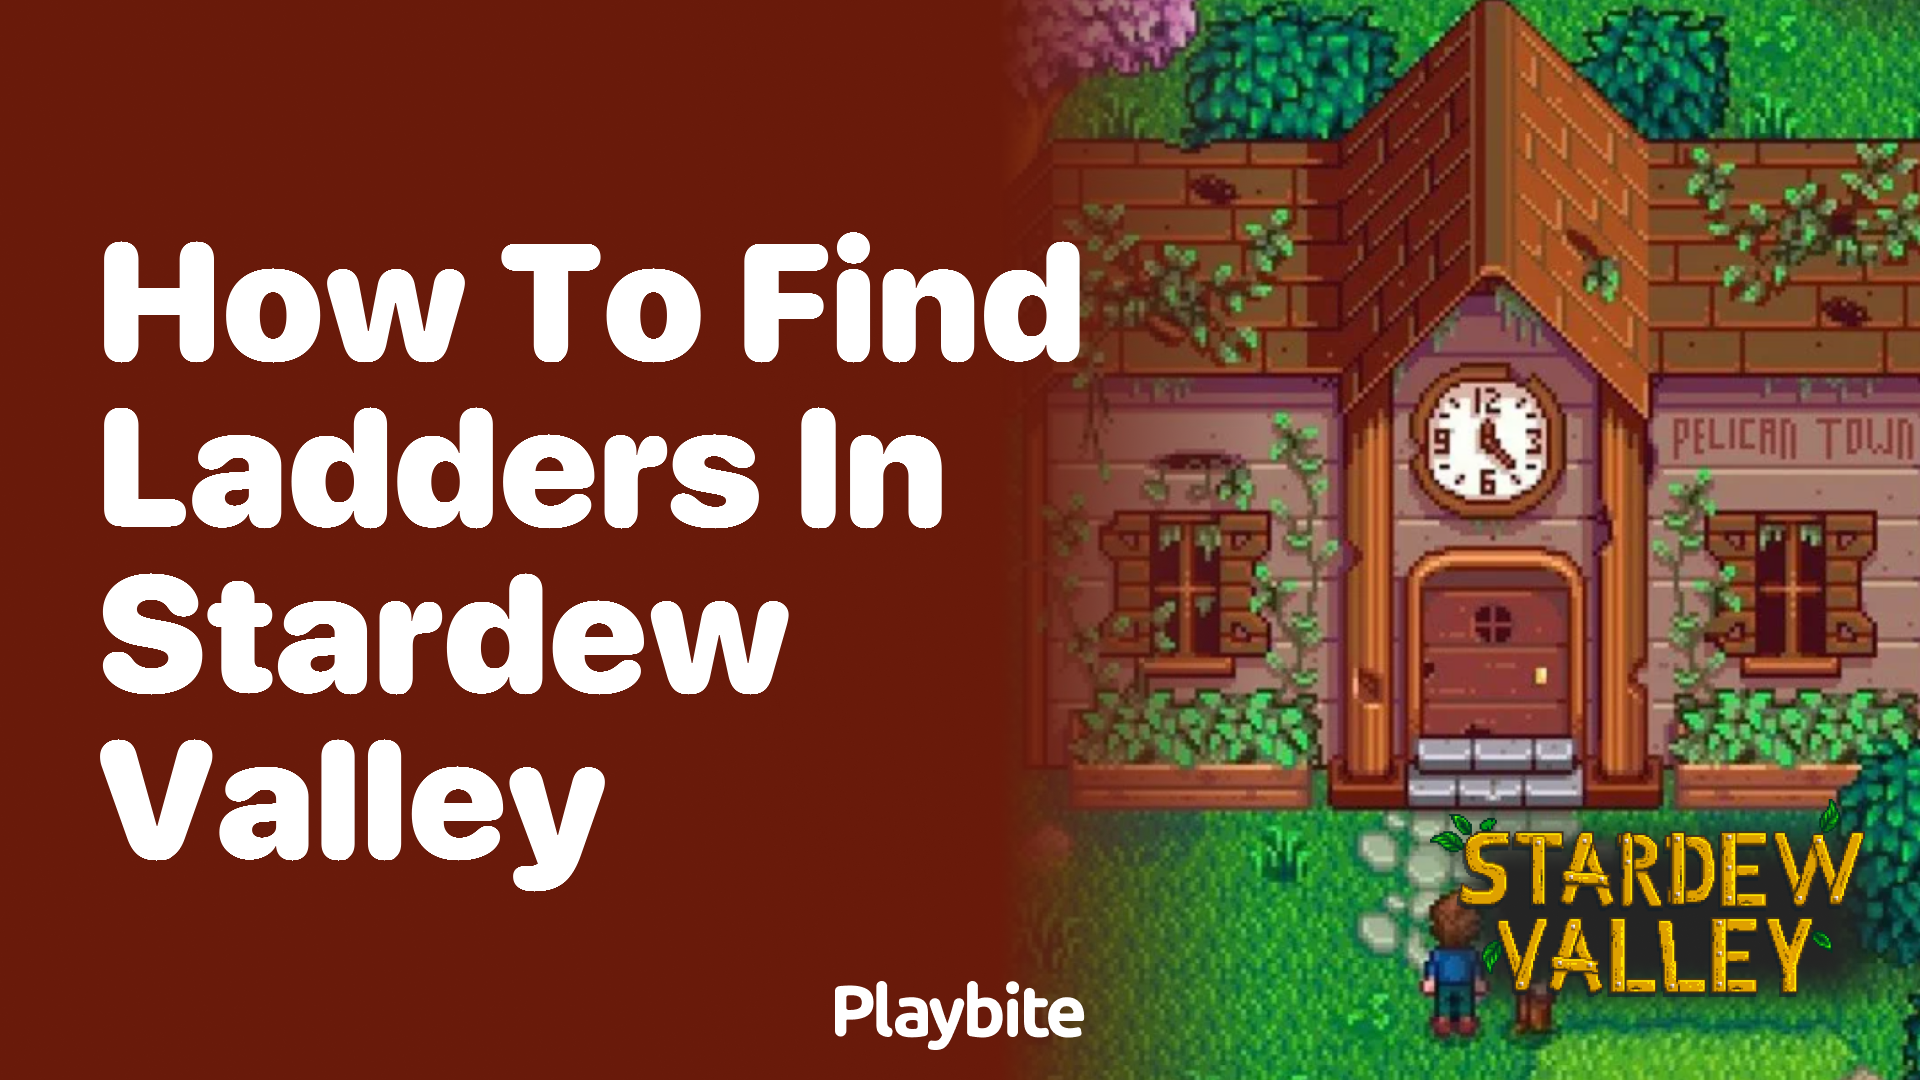 How to find ladders in Stardew Valley